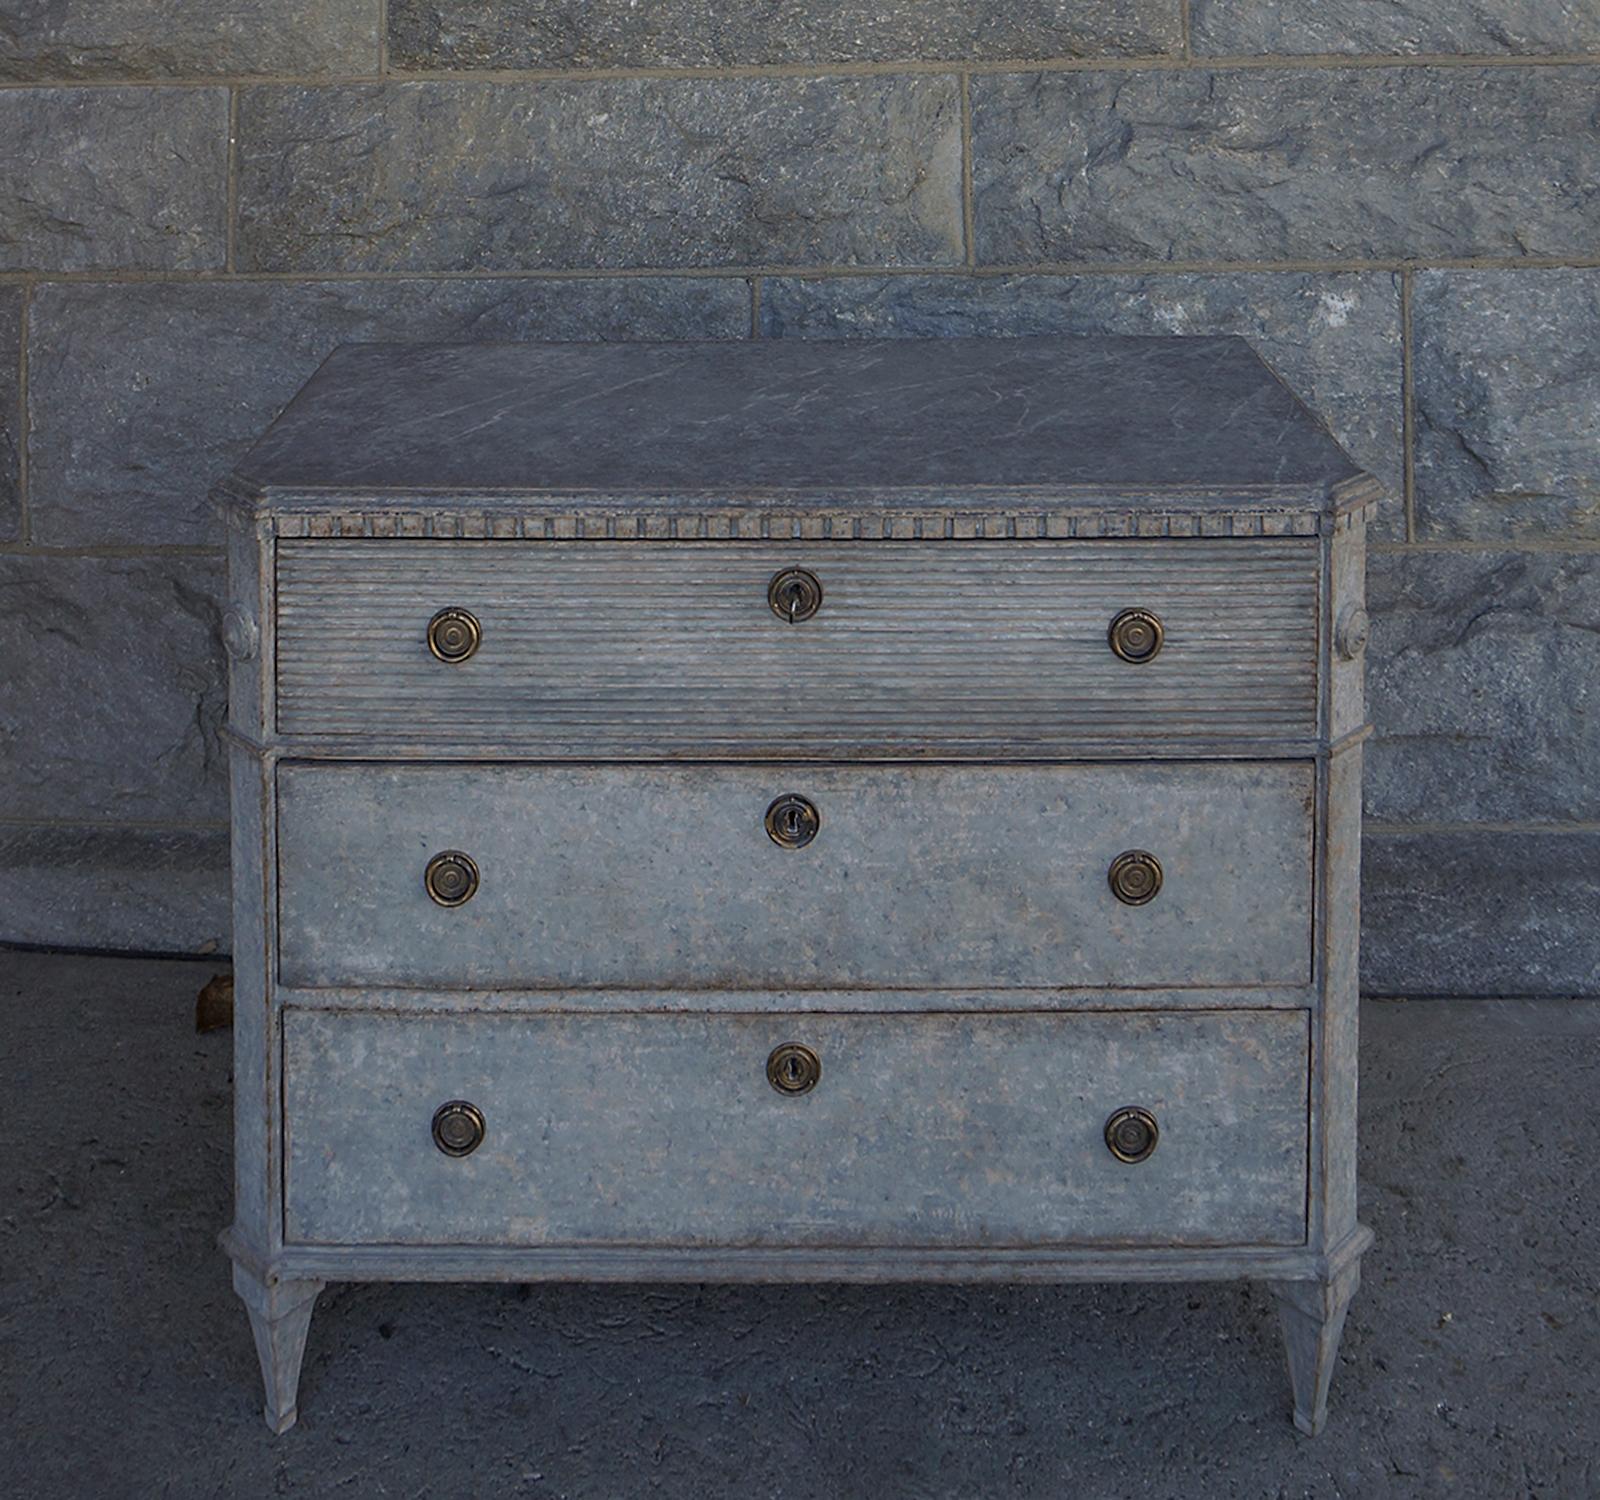 Swedish chest of drawers, circa 1870, in the Gustavian style. Shaped top with marbled paint and dentil molding. Canted corners with applied rondels at the top and tapering square feet at the bottom. Horizontal fluting across the top drawer front. No